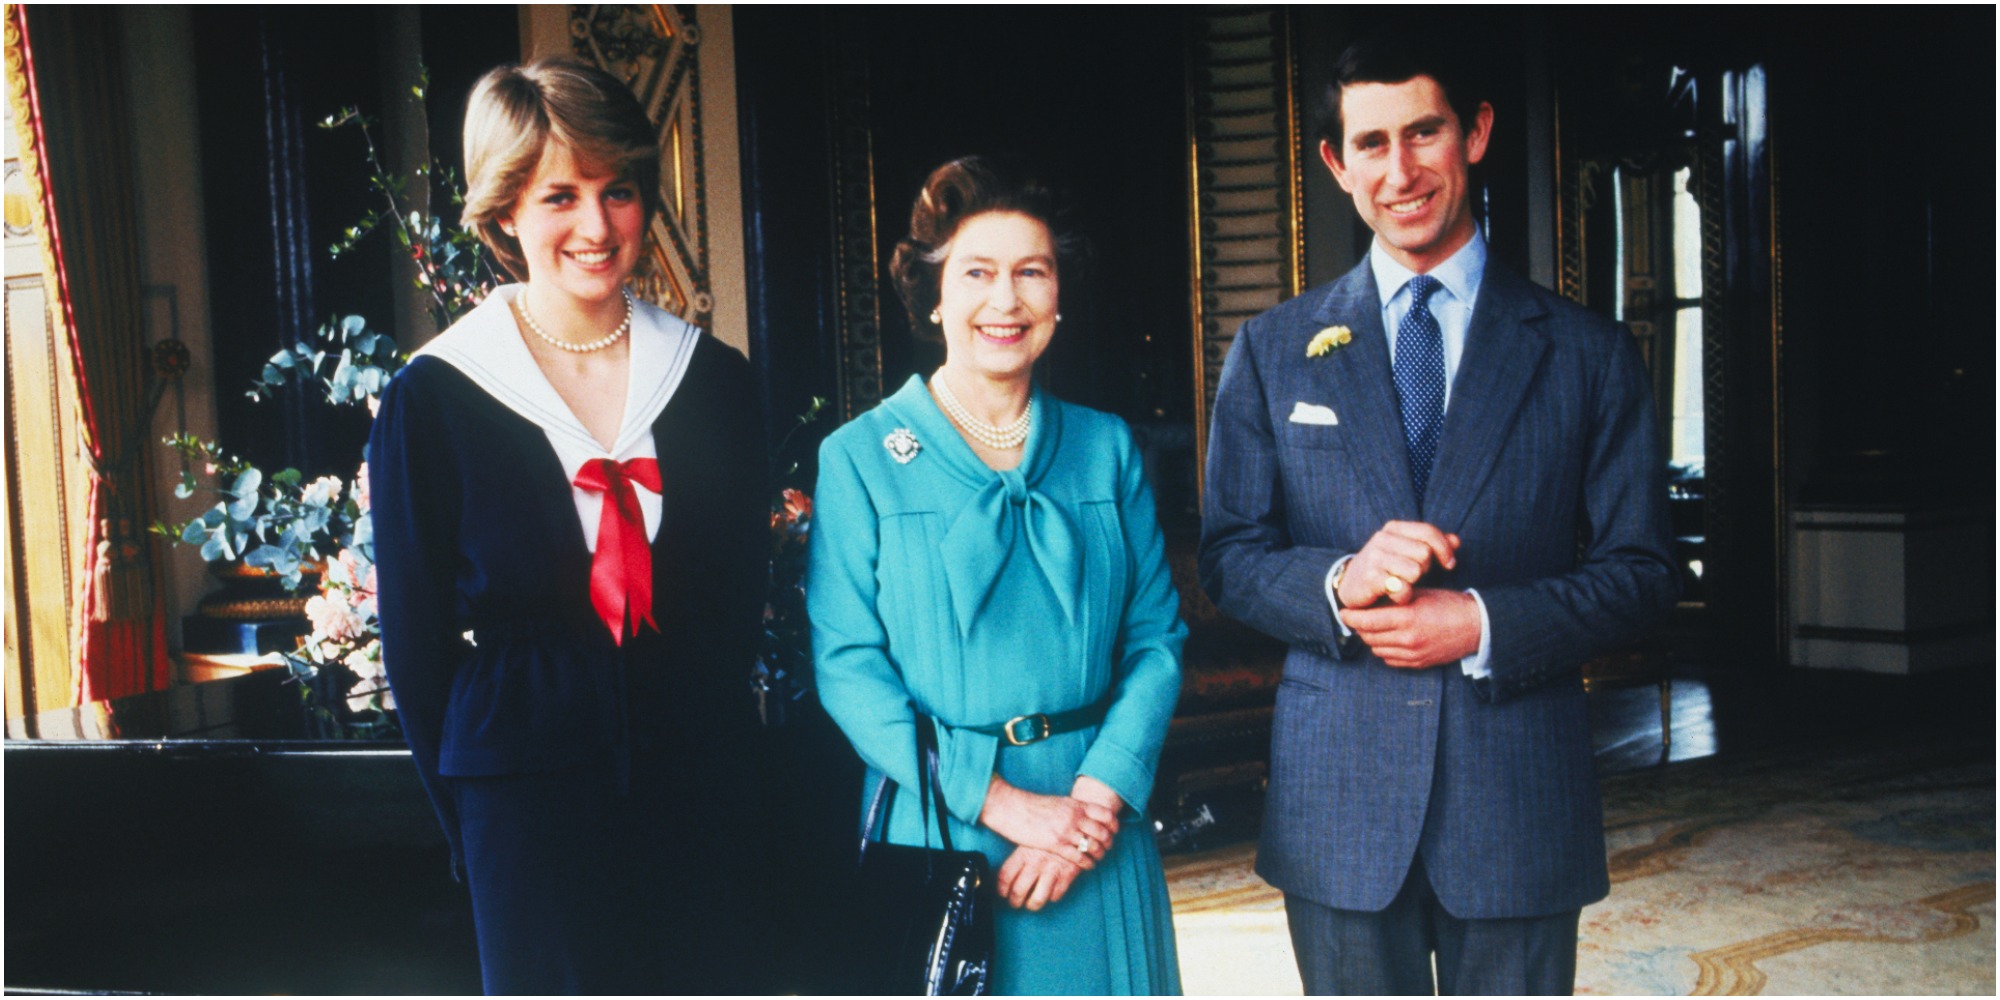 Princess Diana, Queen Elizabeth and Prince Charles pose ahead of the couple's wedding.